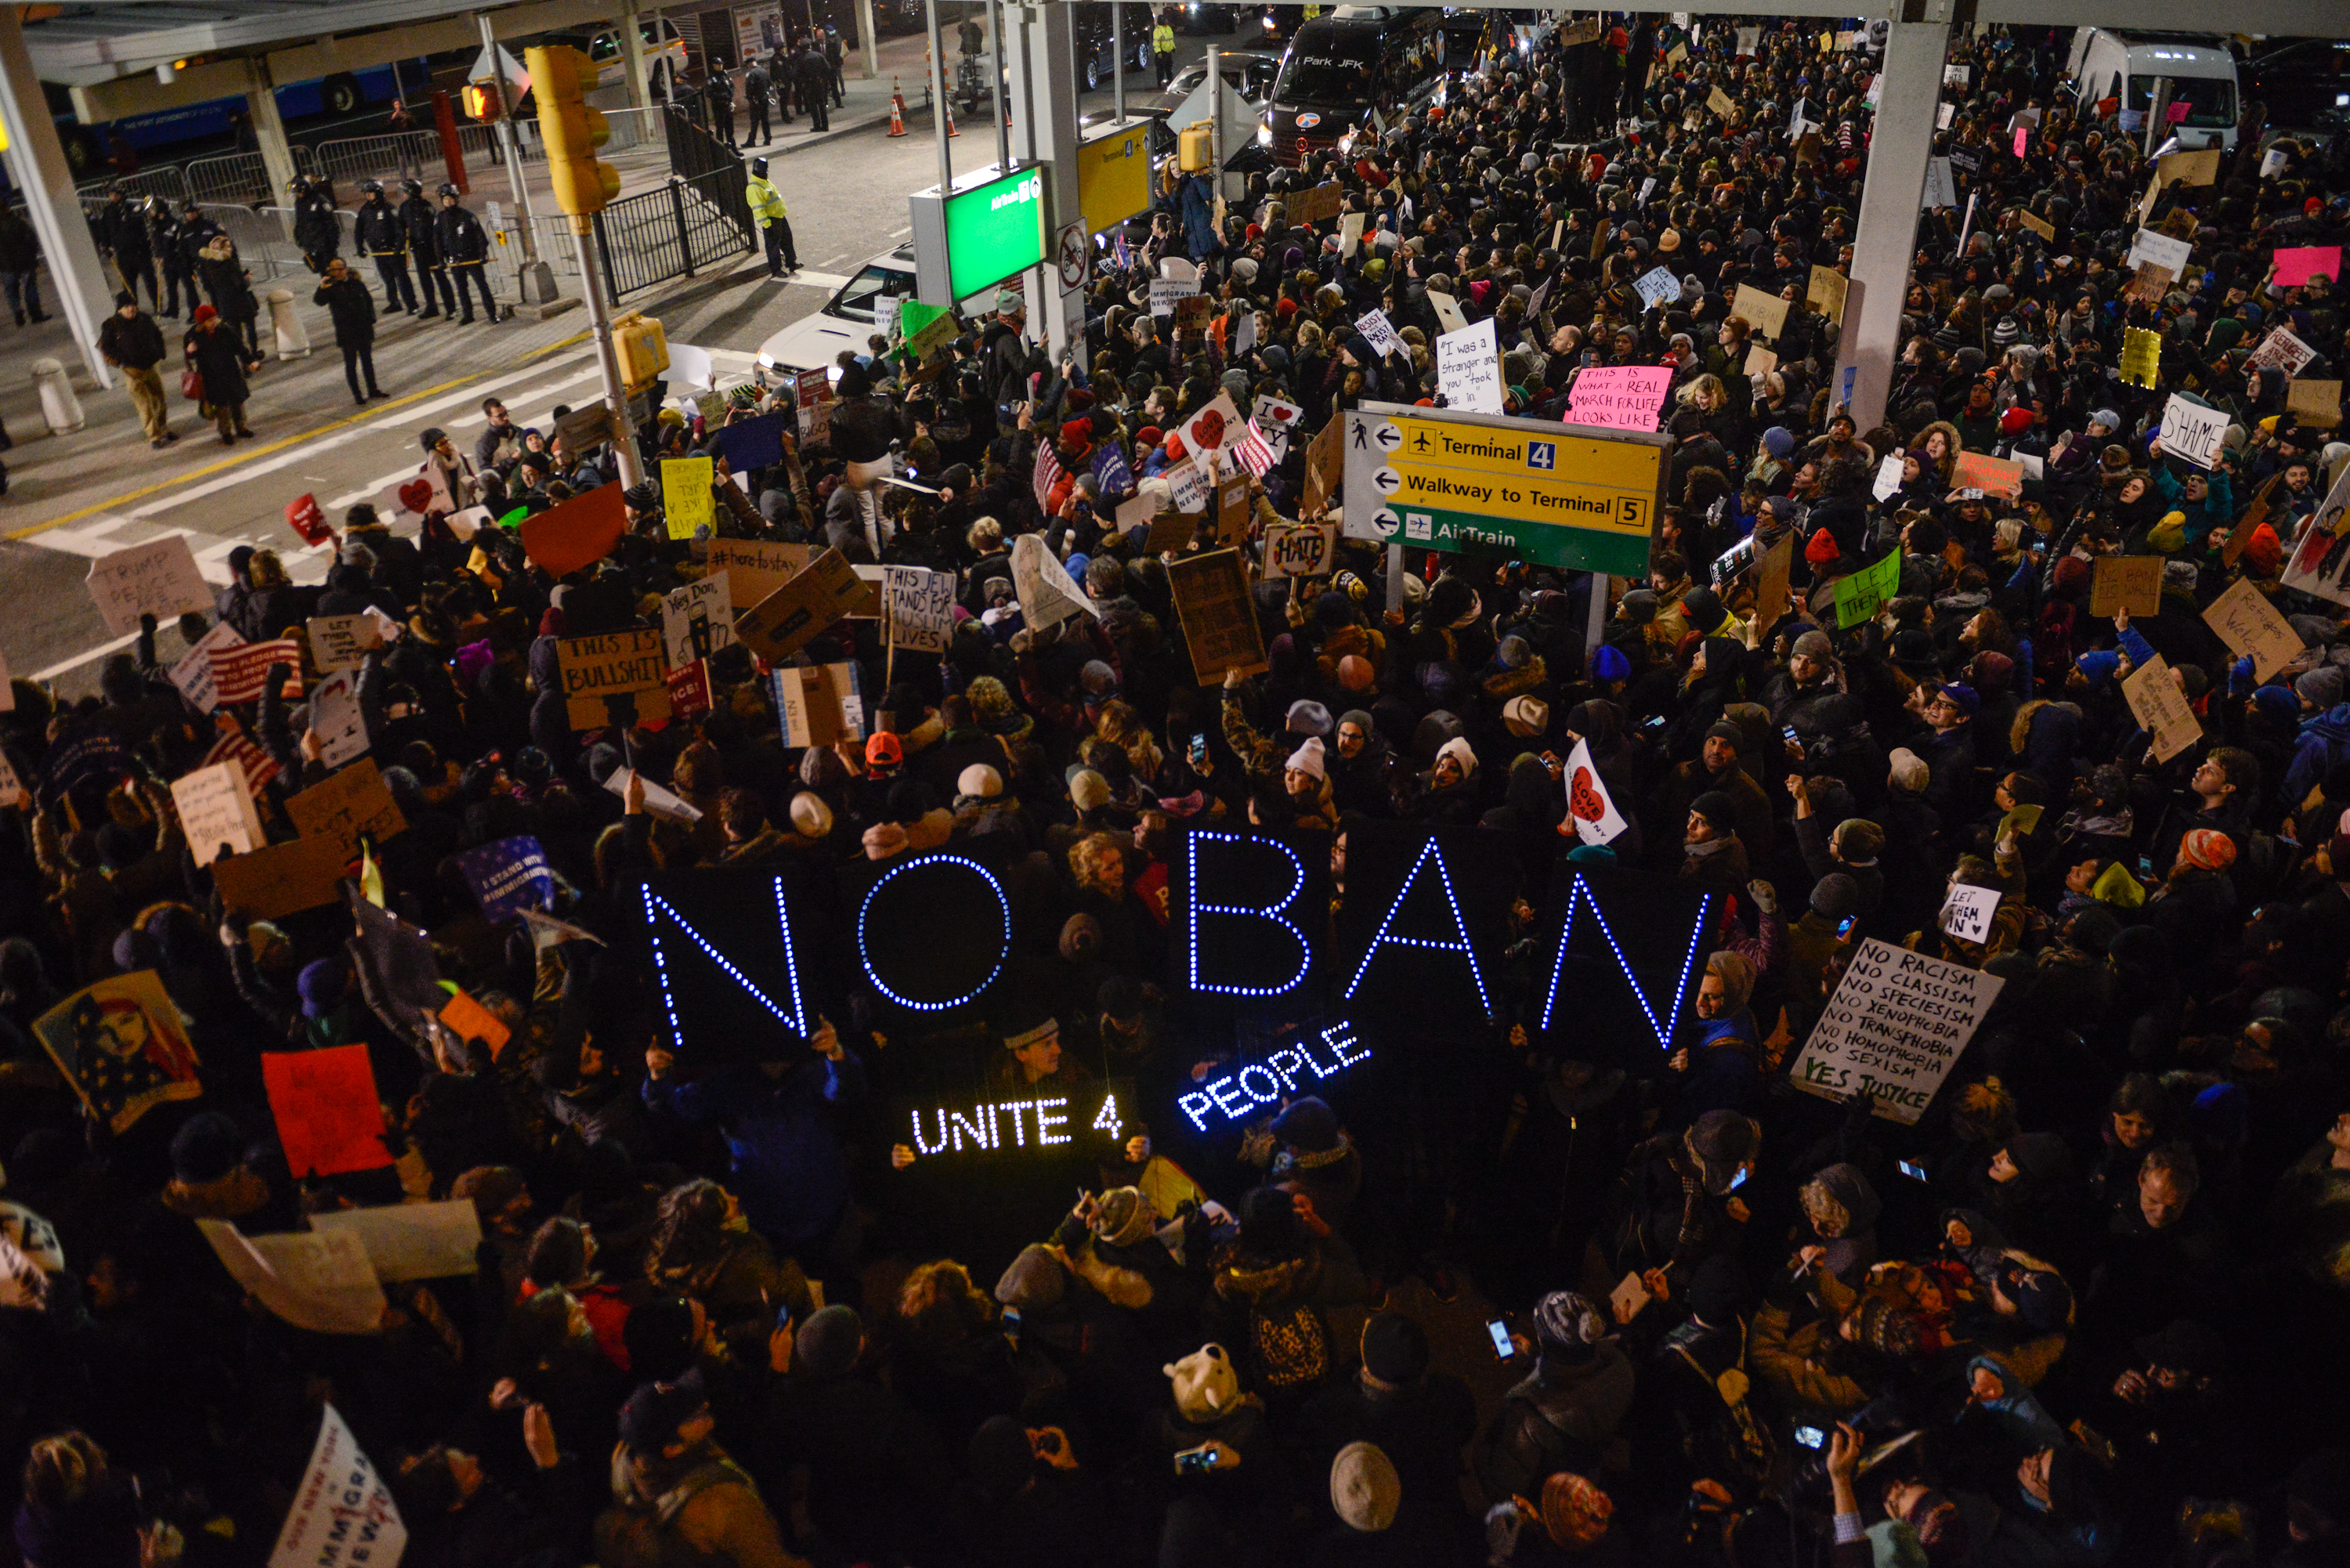 Protestors rally during a demonstration against the Muslim immigration ban at JFK airport January 28 in New York City. (Getty)